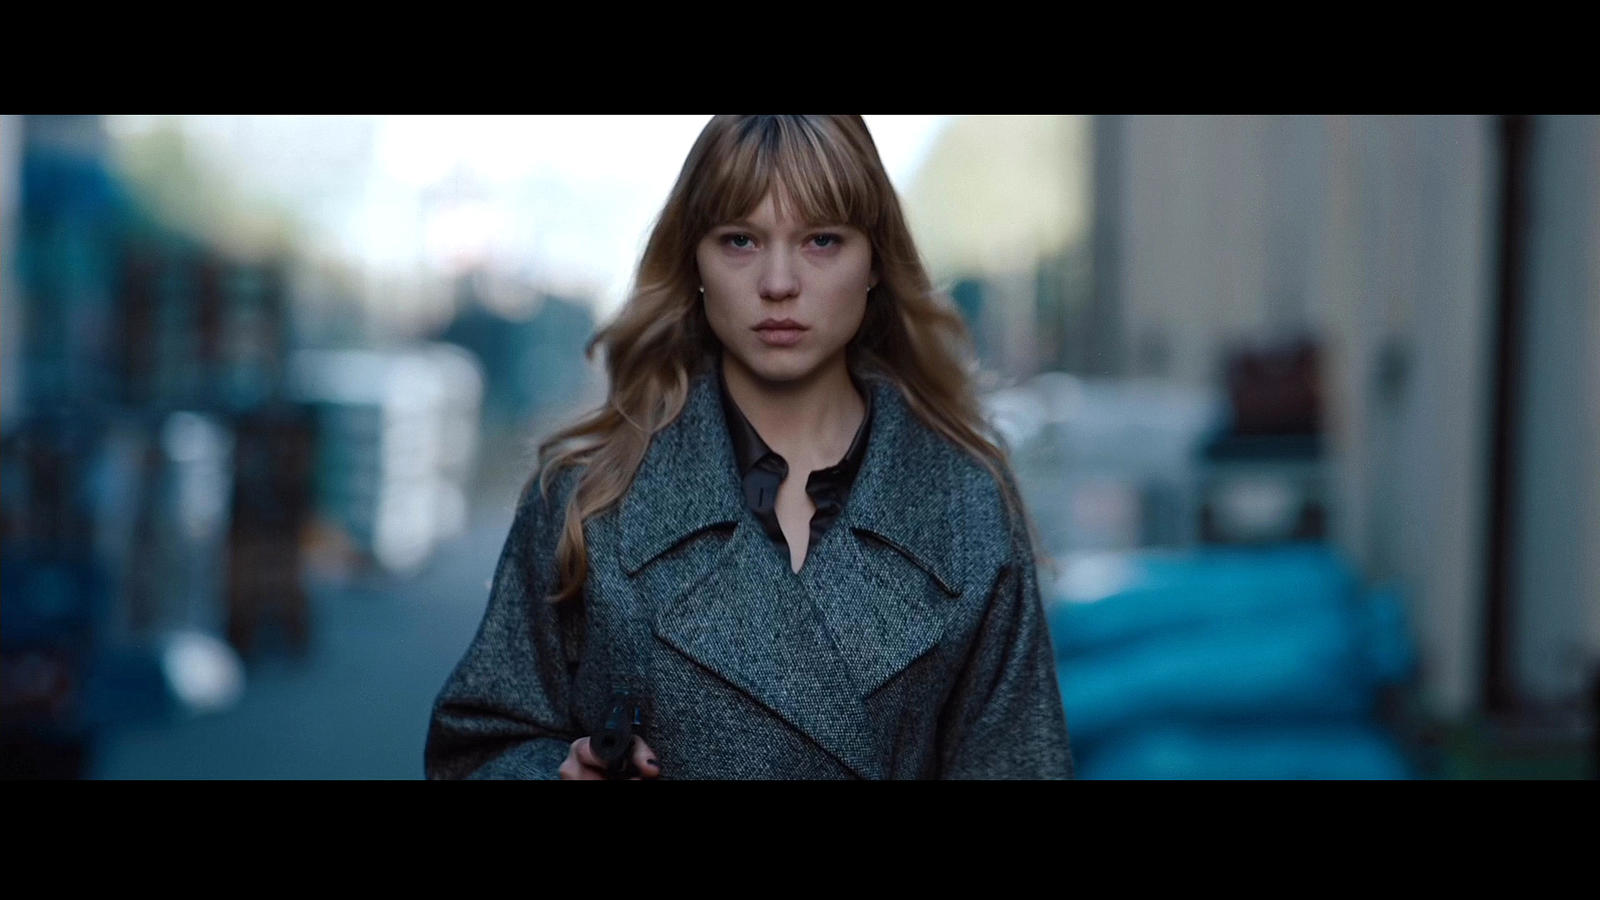 Léa Seydoux in "Mission: Impossible - Ghost Protocol" (2011)